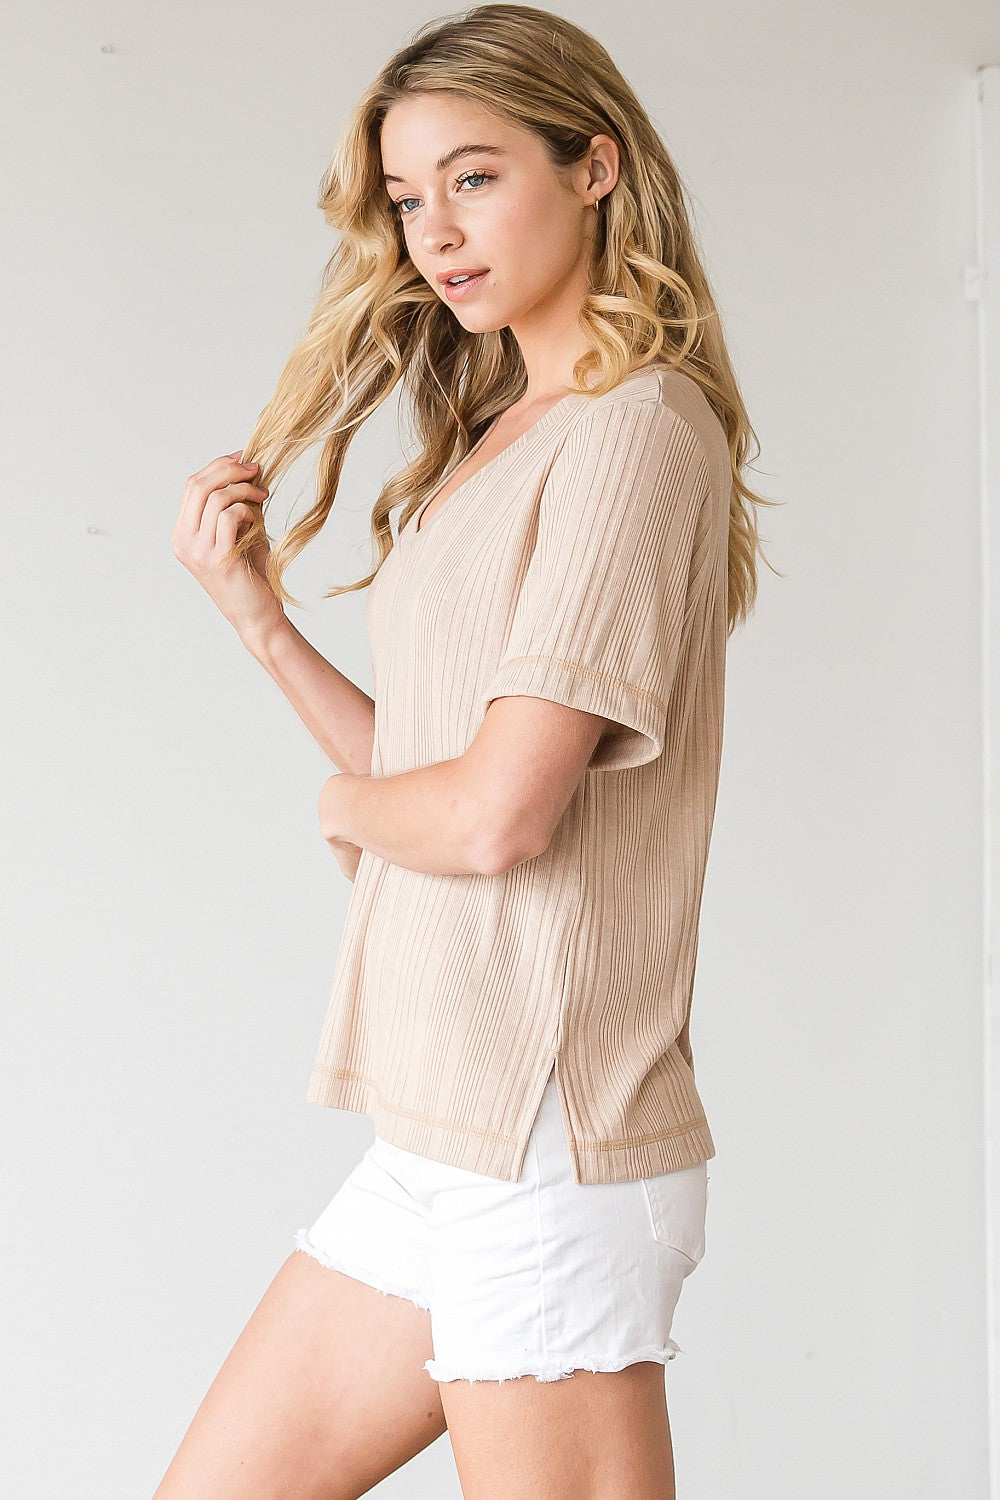 Taupe V-Neck Knit Top-short sleeve top-CY Fashion-Styled by Steph-Women's Fashion Clothing Boutique, Indiana